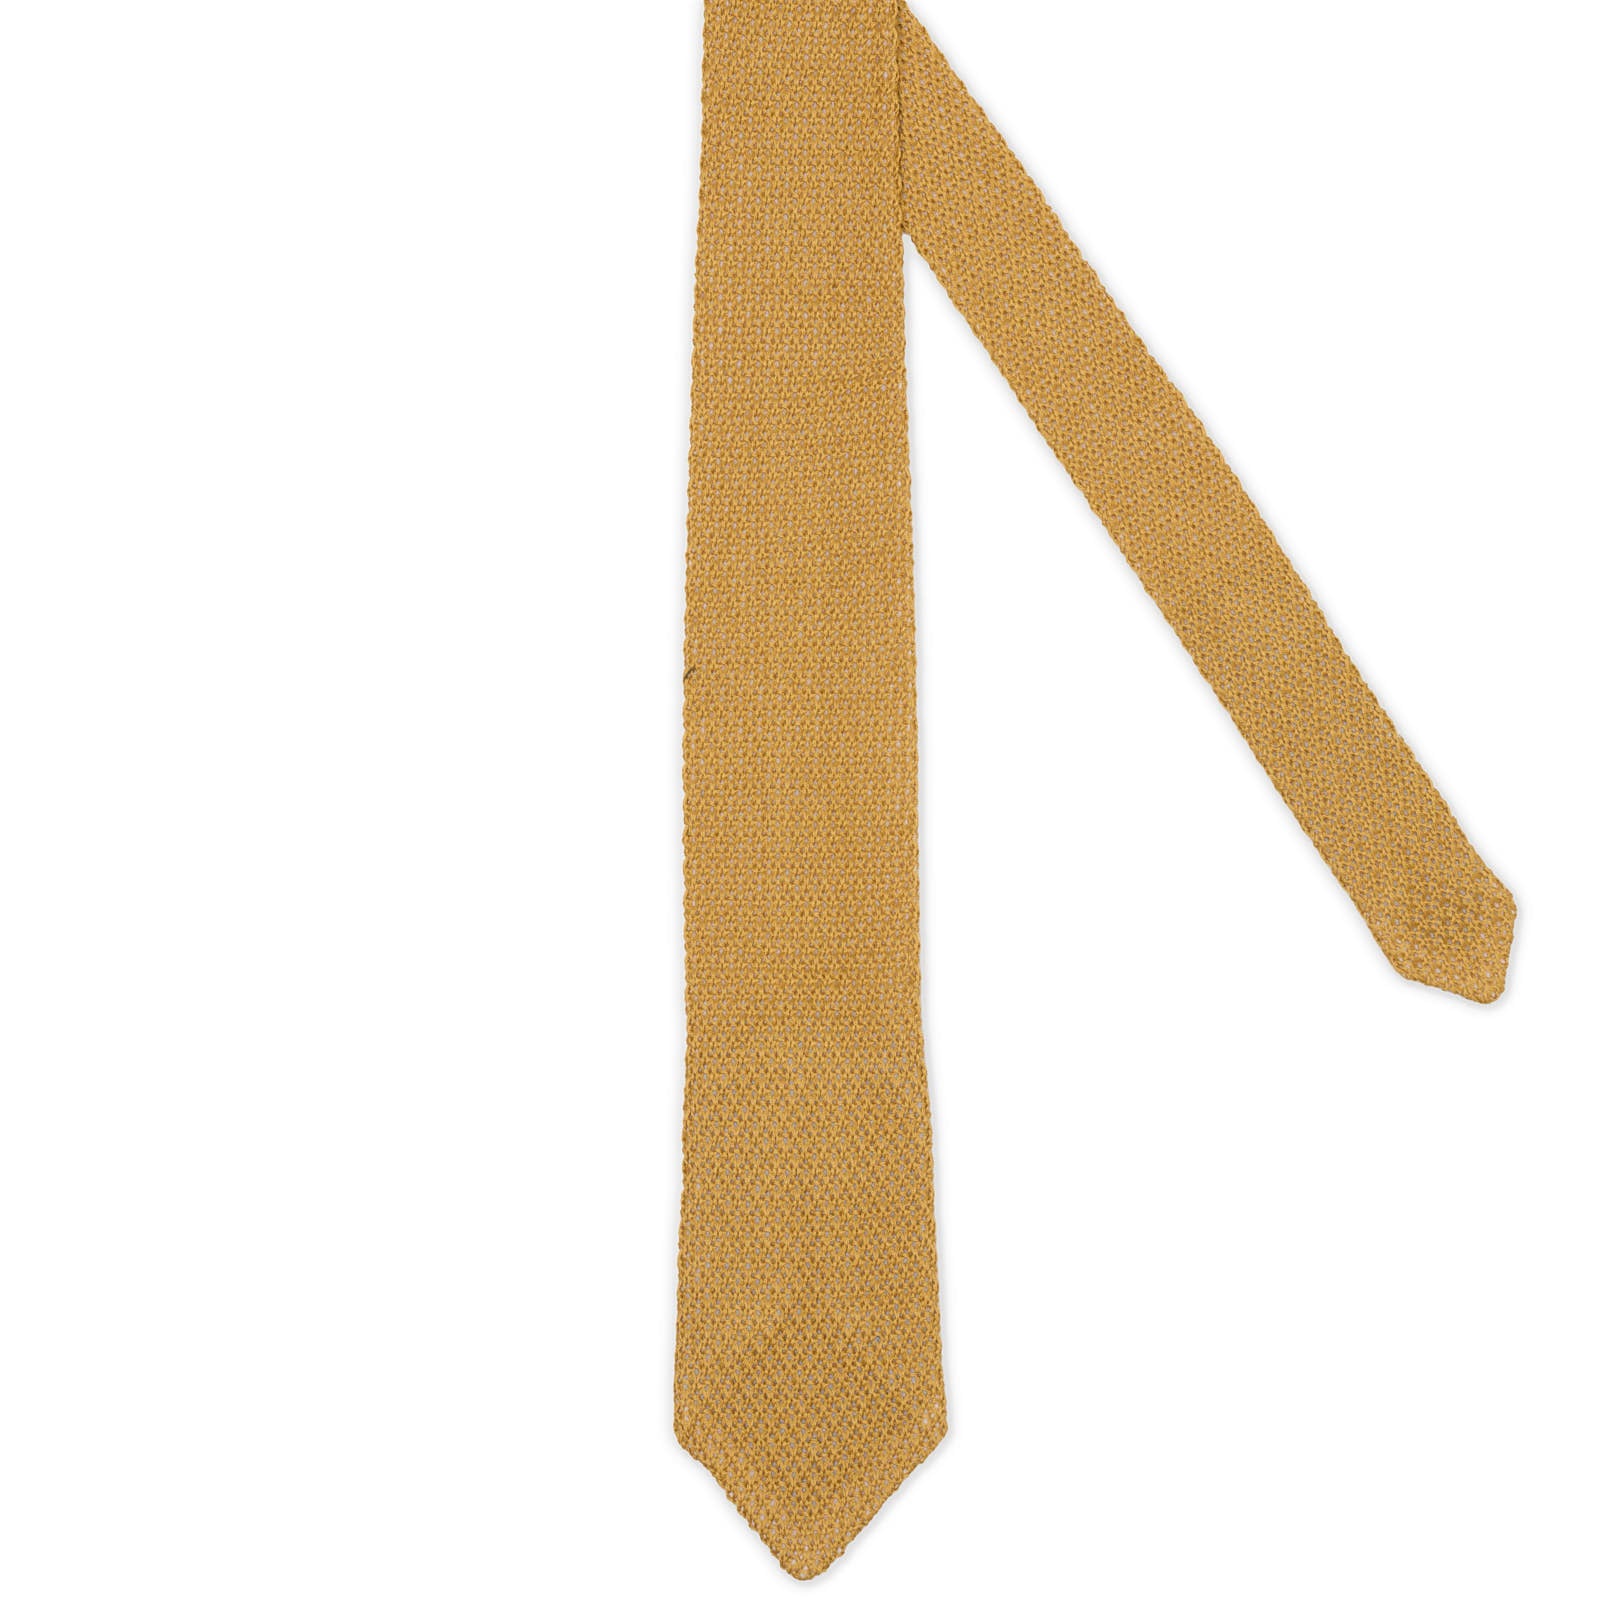 VANNUCCI MILANO Gold Knitted Cotton Tie NEW